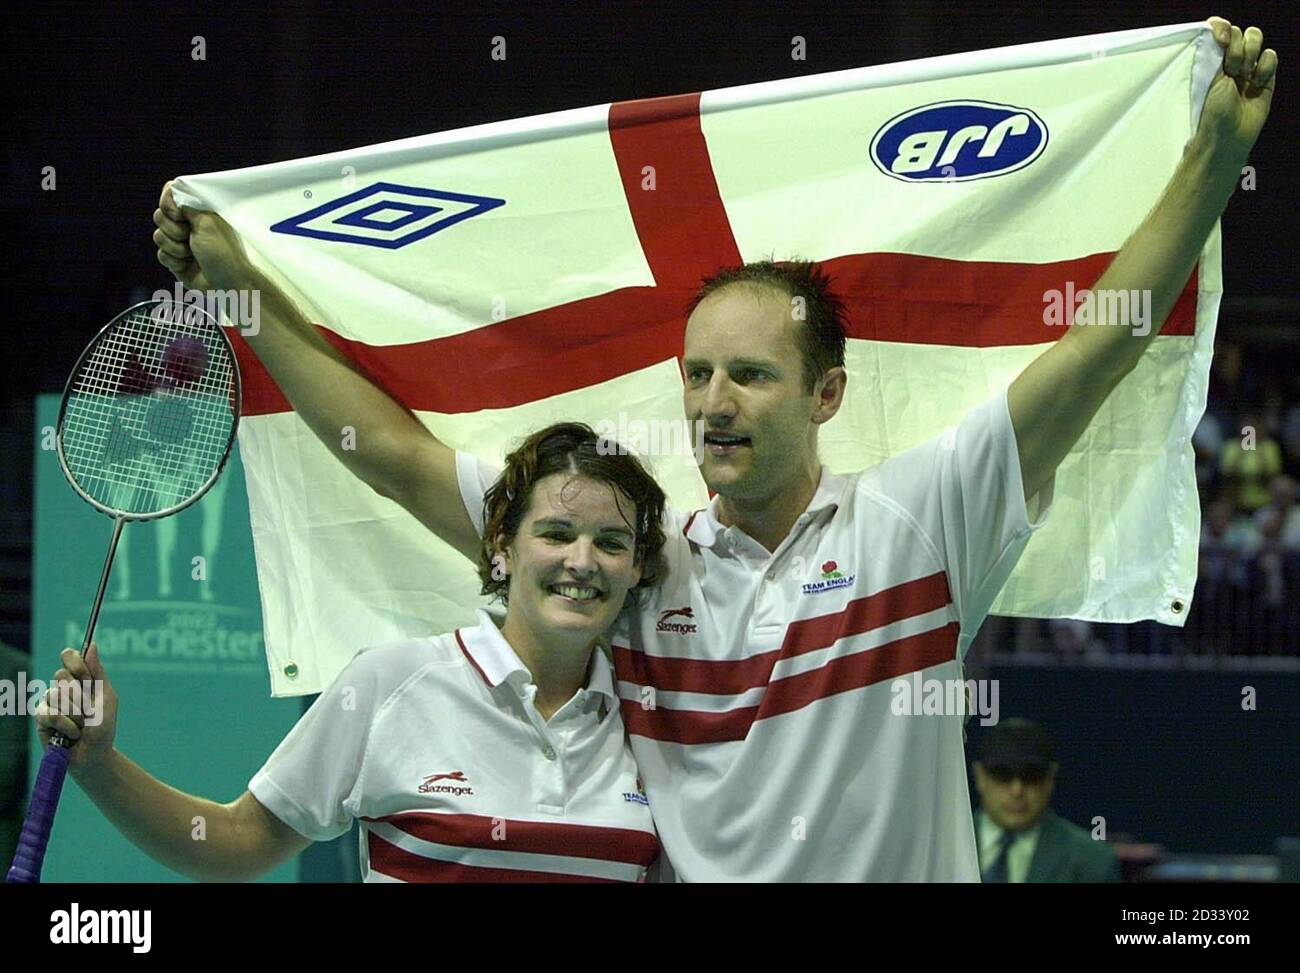 England's Simon Archer and Jo Goode celebrate winning the gold medal in badminton at the Bolton Arena, during the XVII Commonwealth Games. Stock Photo